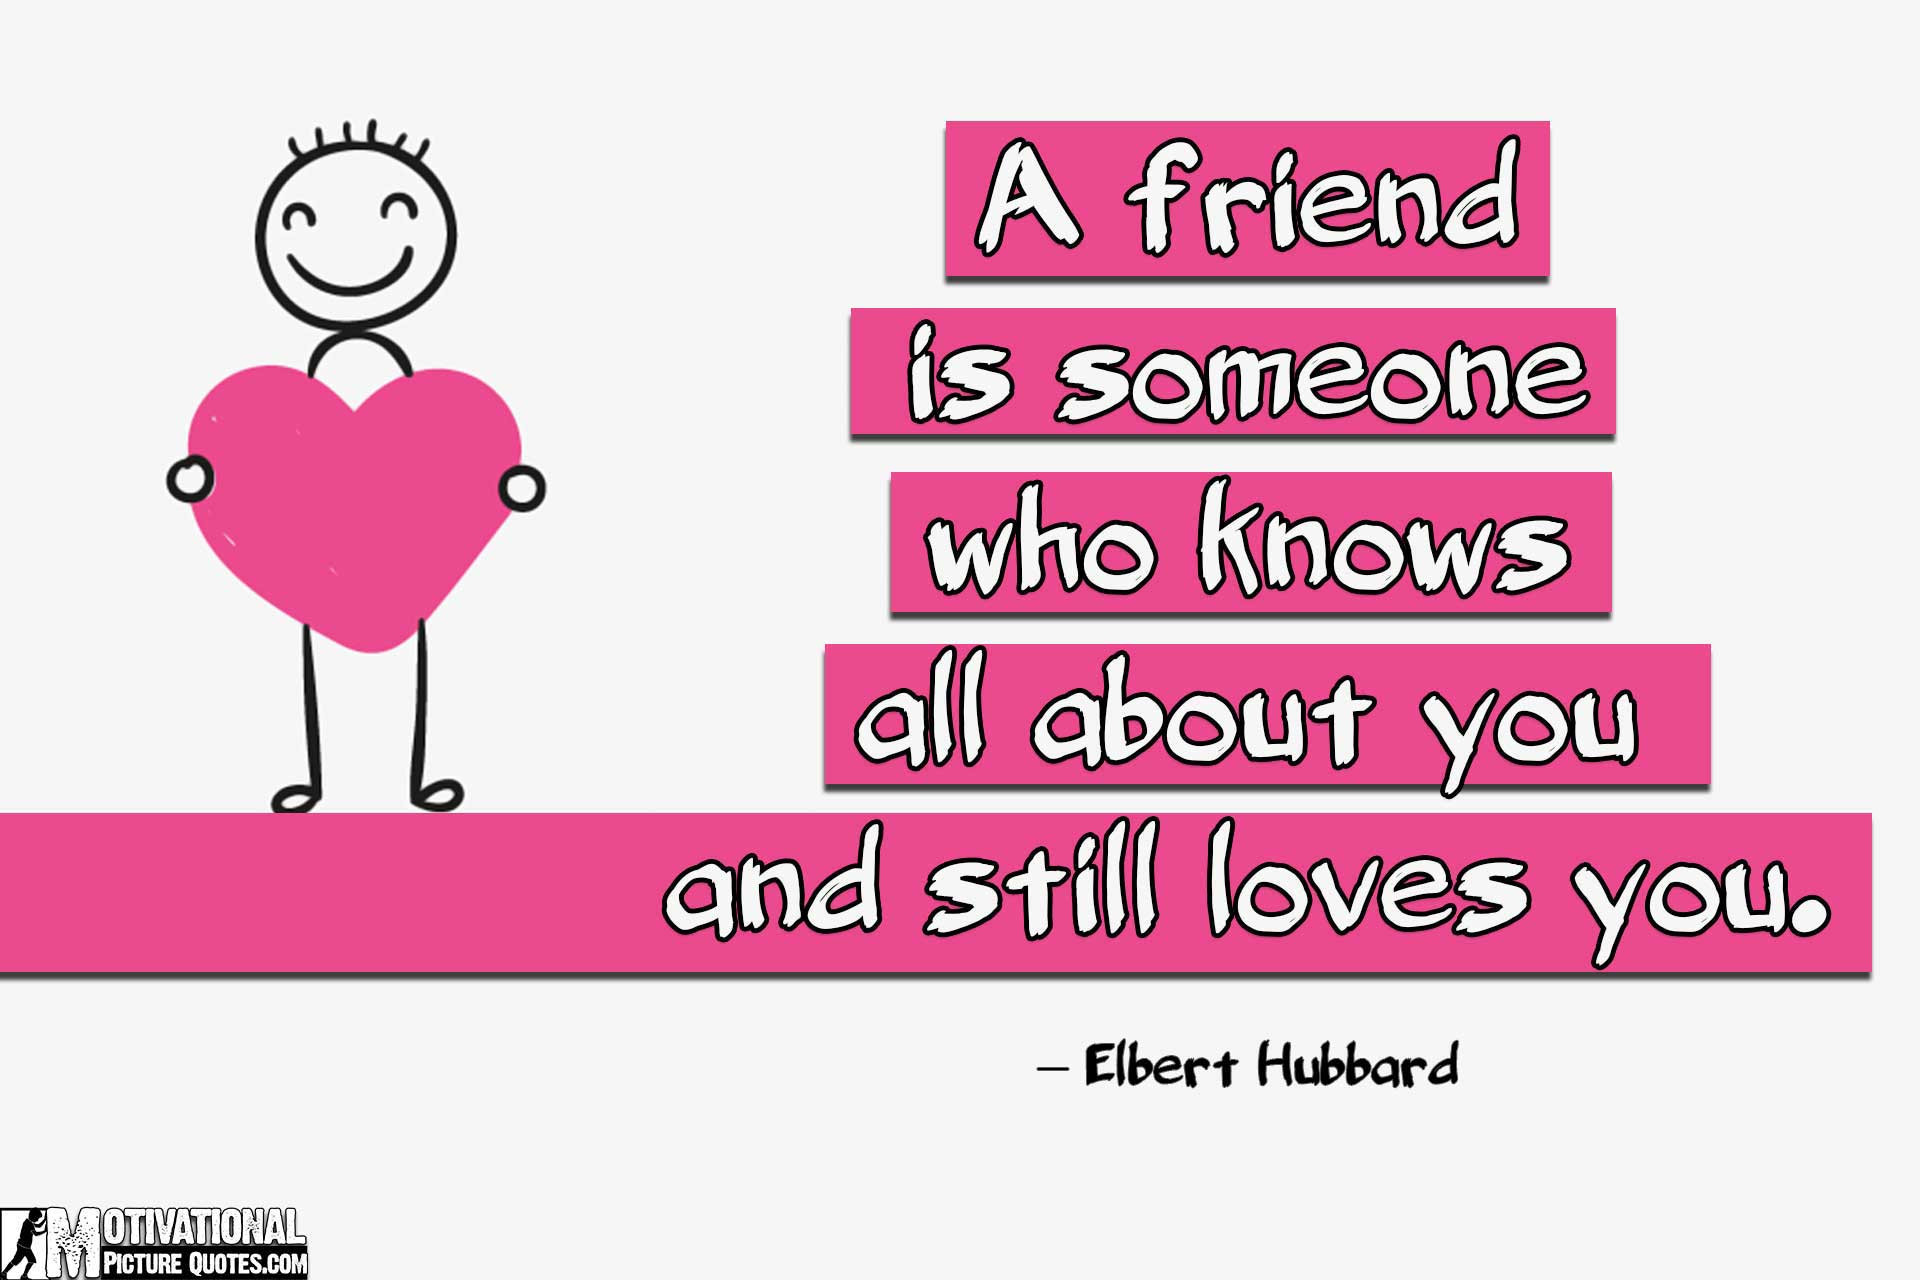 Positive Quotes For Friends
 25 Inspirational Friendship Quotes